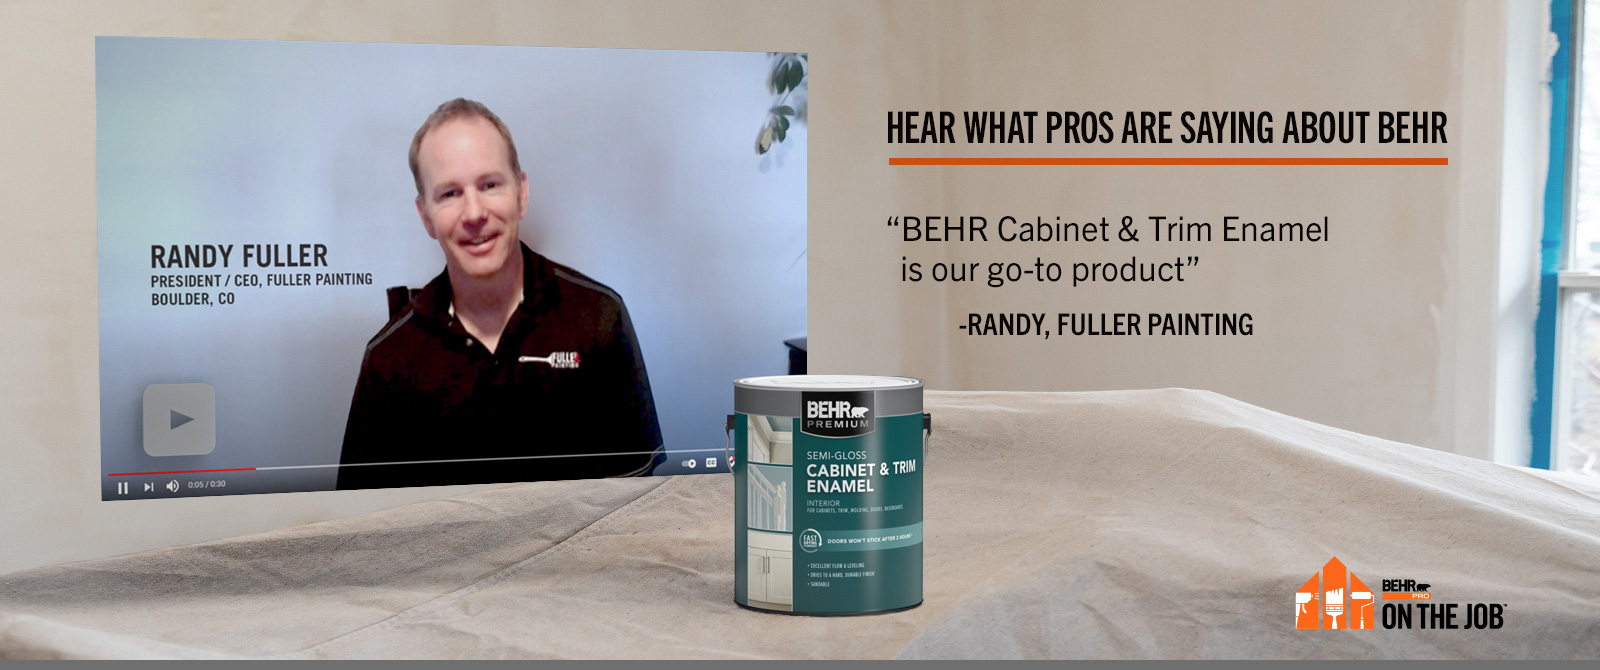  BEHR PRO ON THE JOB - See what Pros are saying about Behr